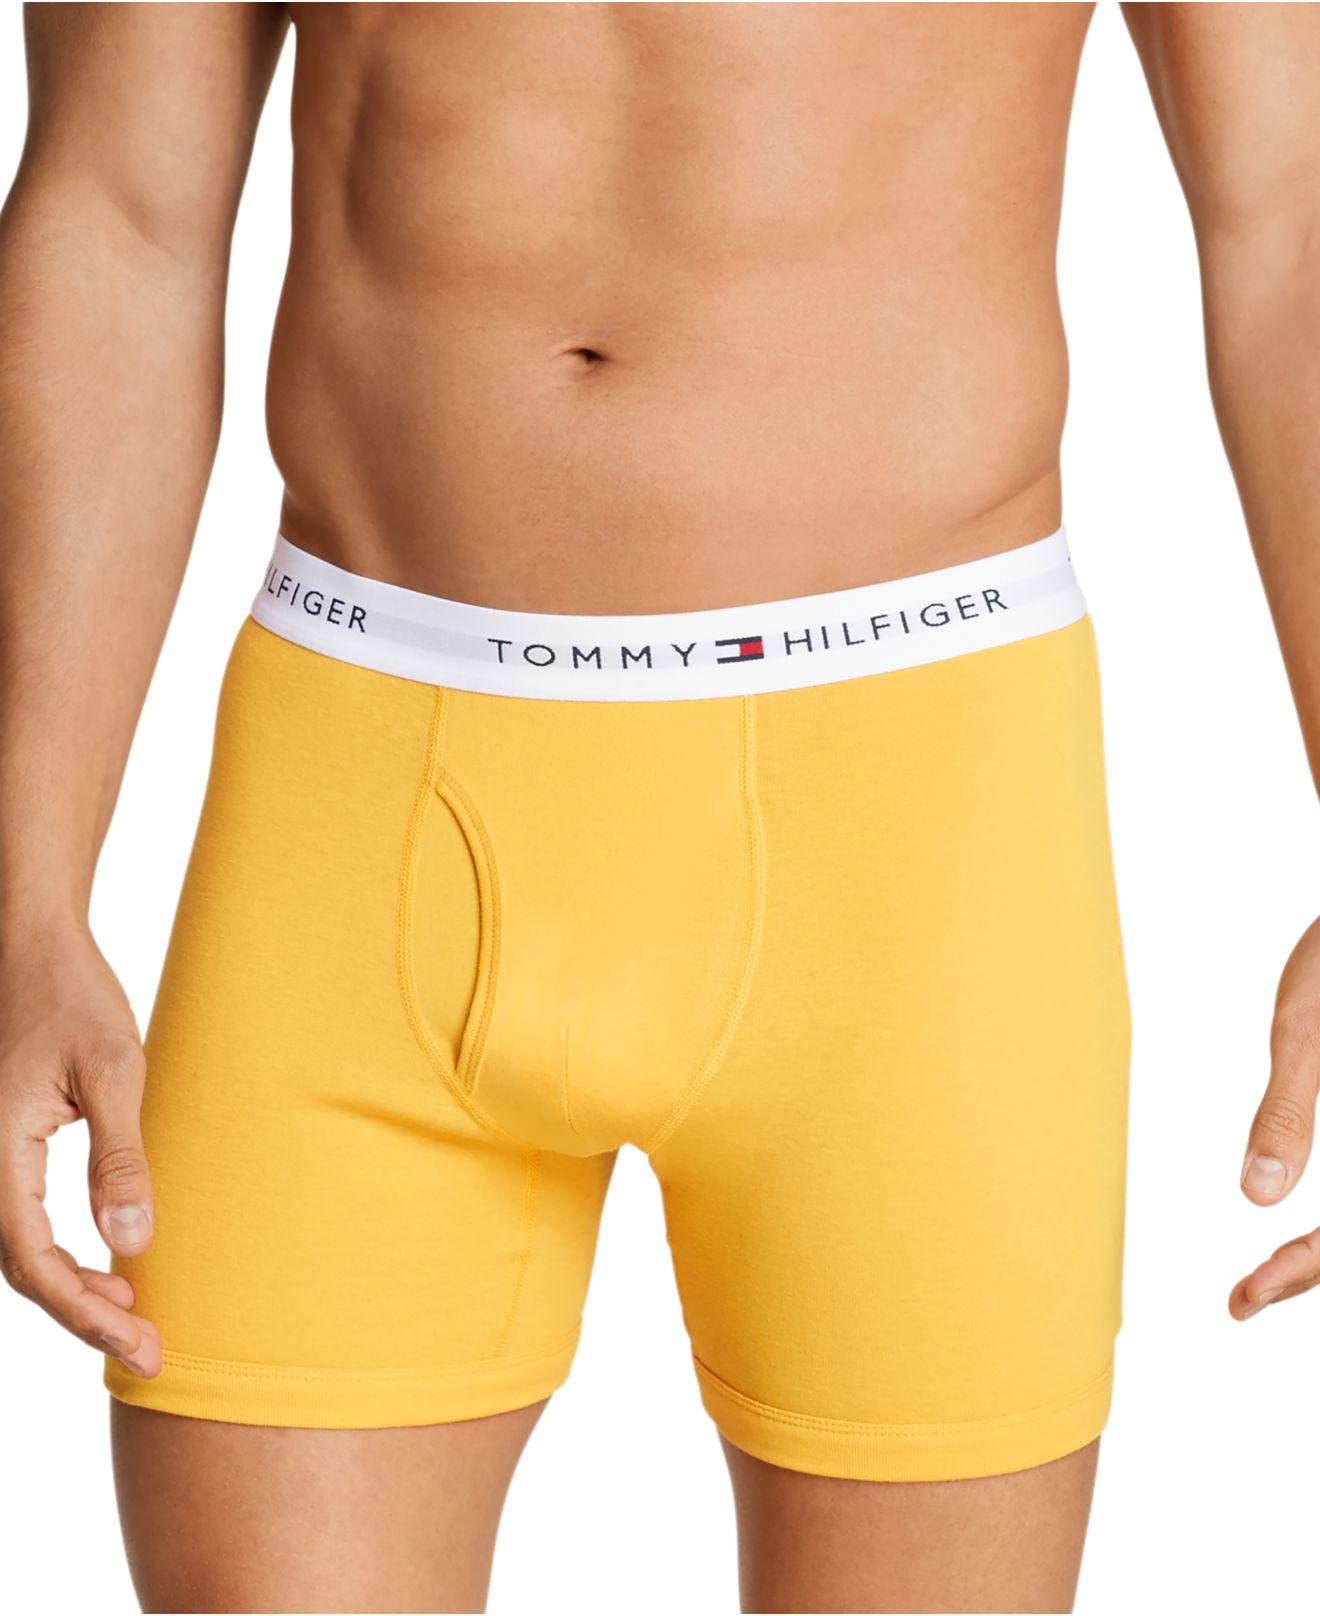 Tommy Hilfiger 5-pk. Cotton Classics Boxer Briefs in Yellow for